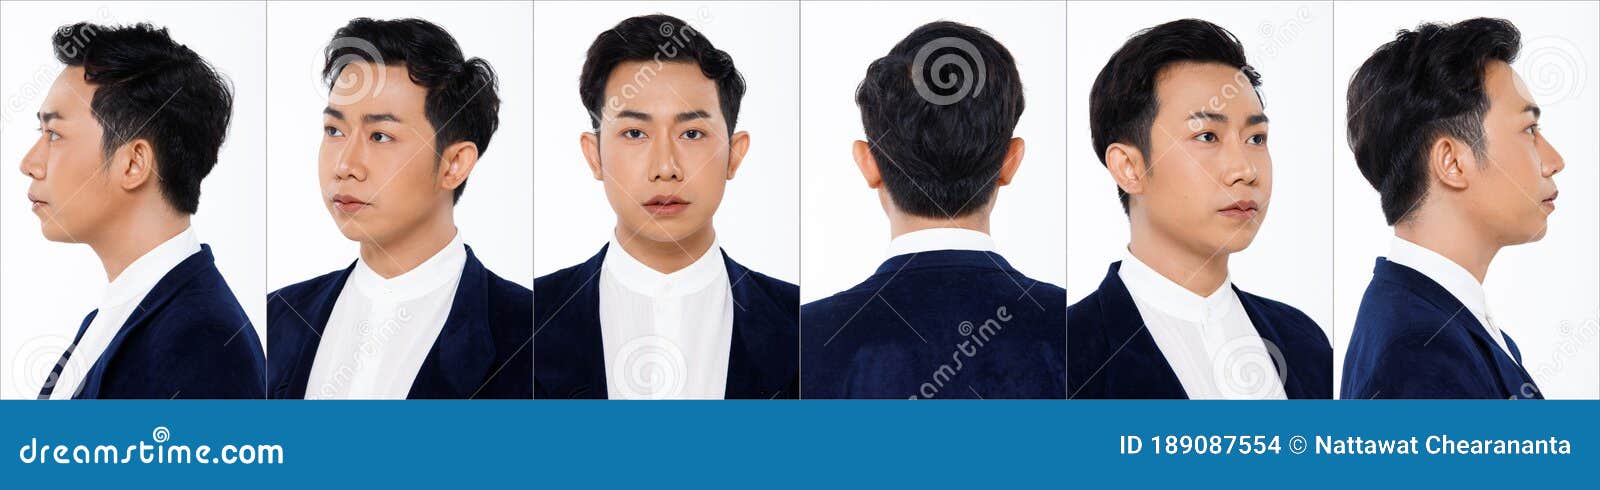 Asian Man 20s Blue Suit Difference Poses White Background Isolated Stock  Photo - Image of hair, concept: 189087554